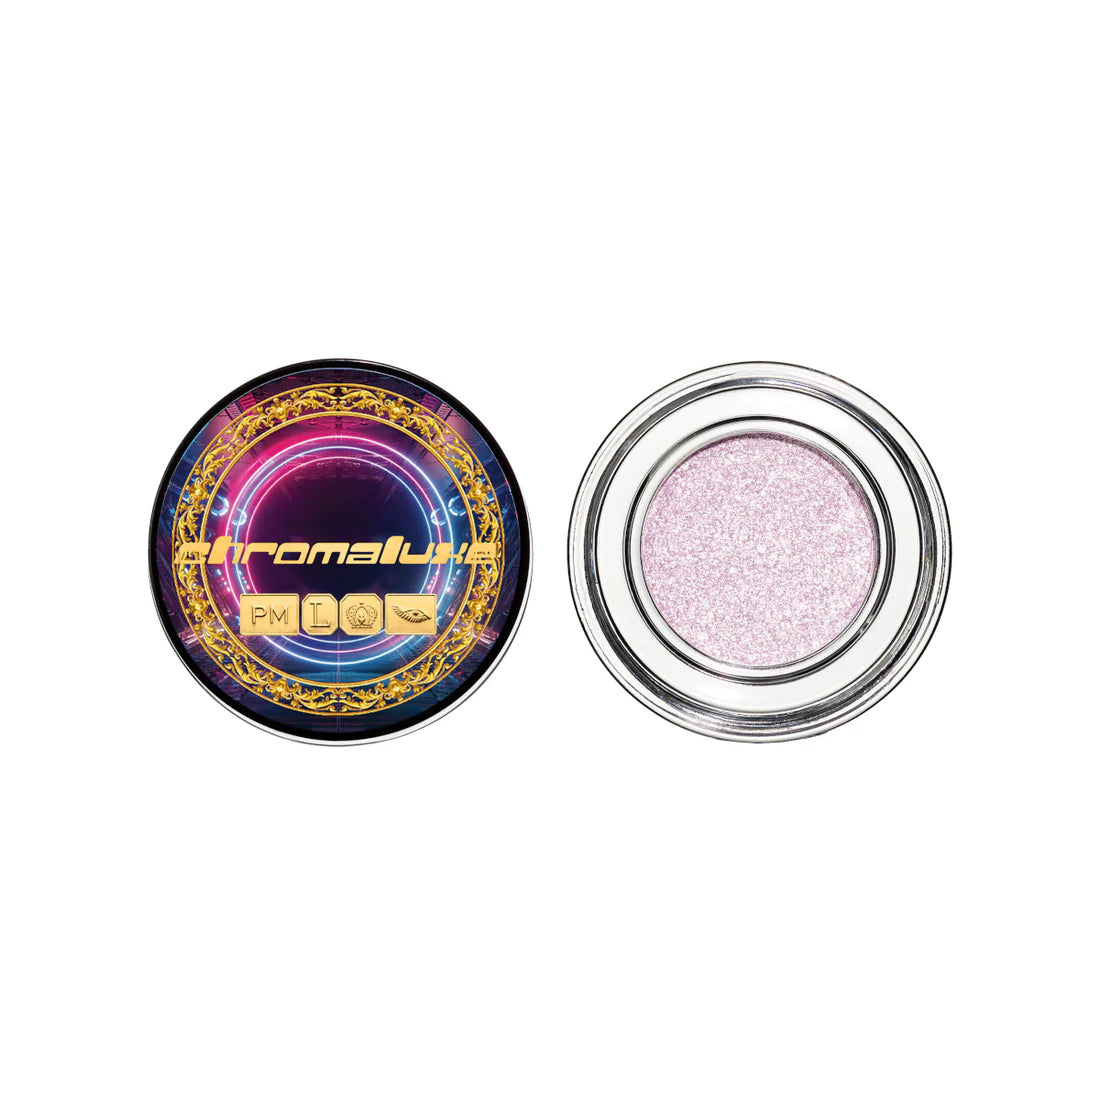 Pat McGrath ChromaLuxe Artistry Pigment Lilac Liaison (Soft Lilac Purple with Silver Metallic Shimmer)